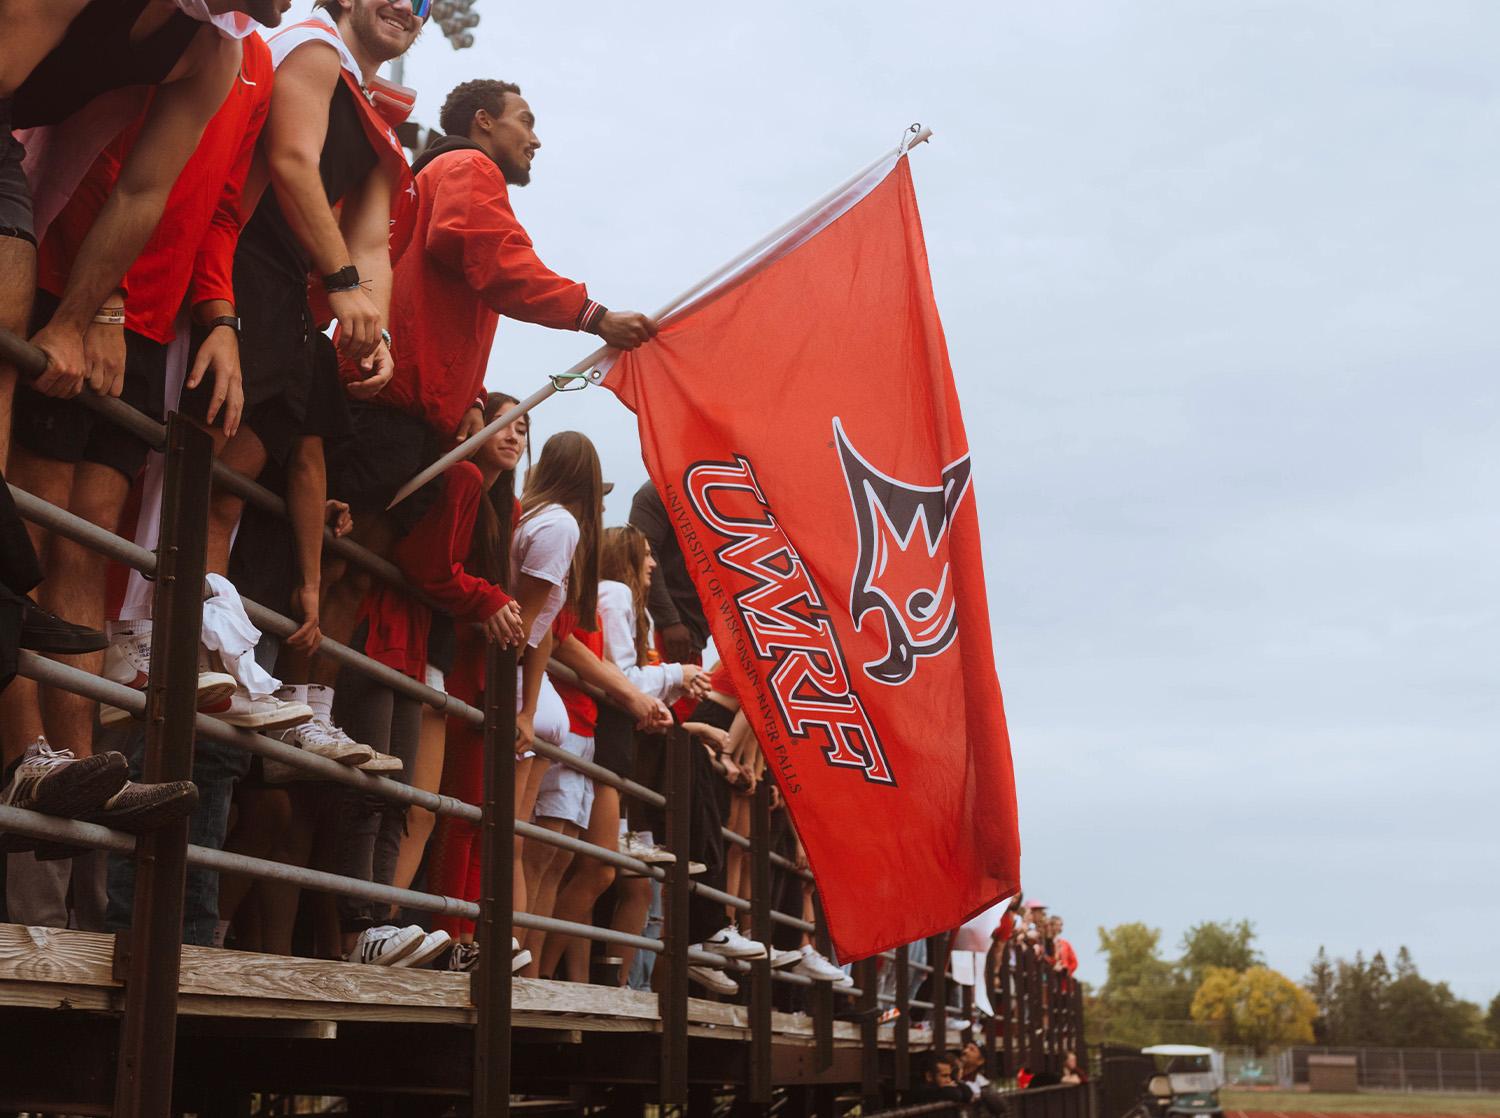 A student waves a UWRF flag during the homecoming football game